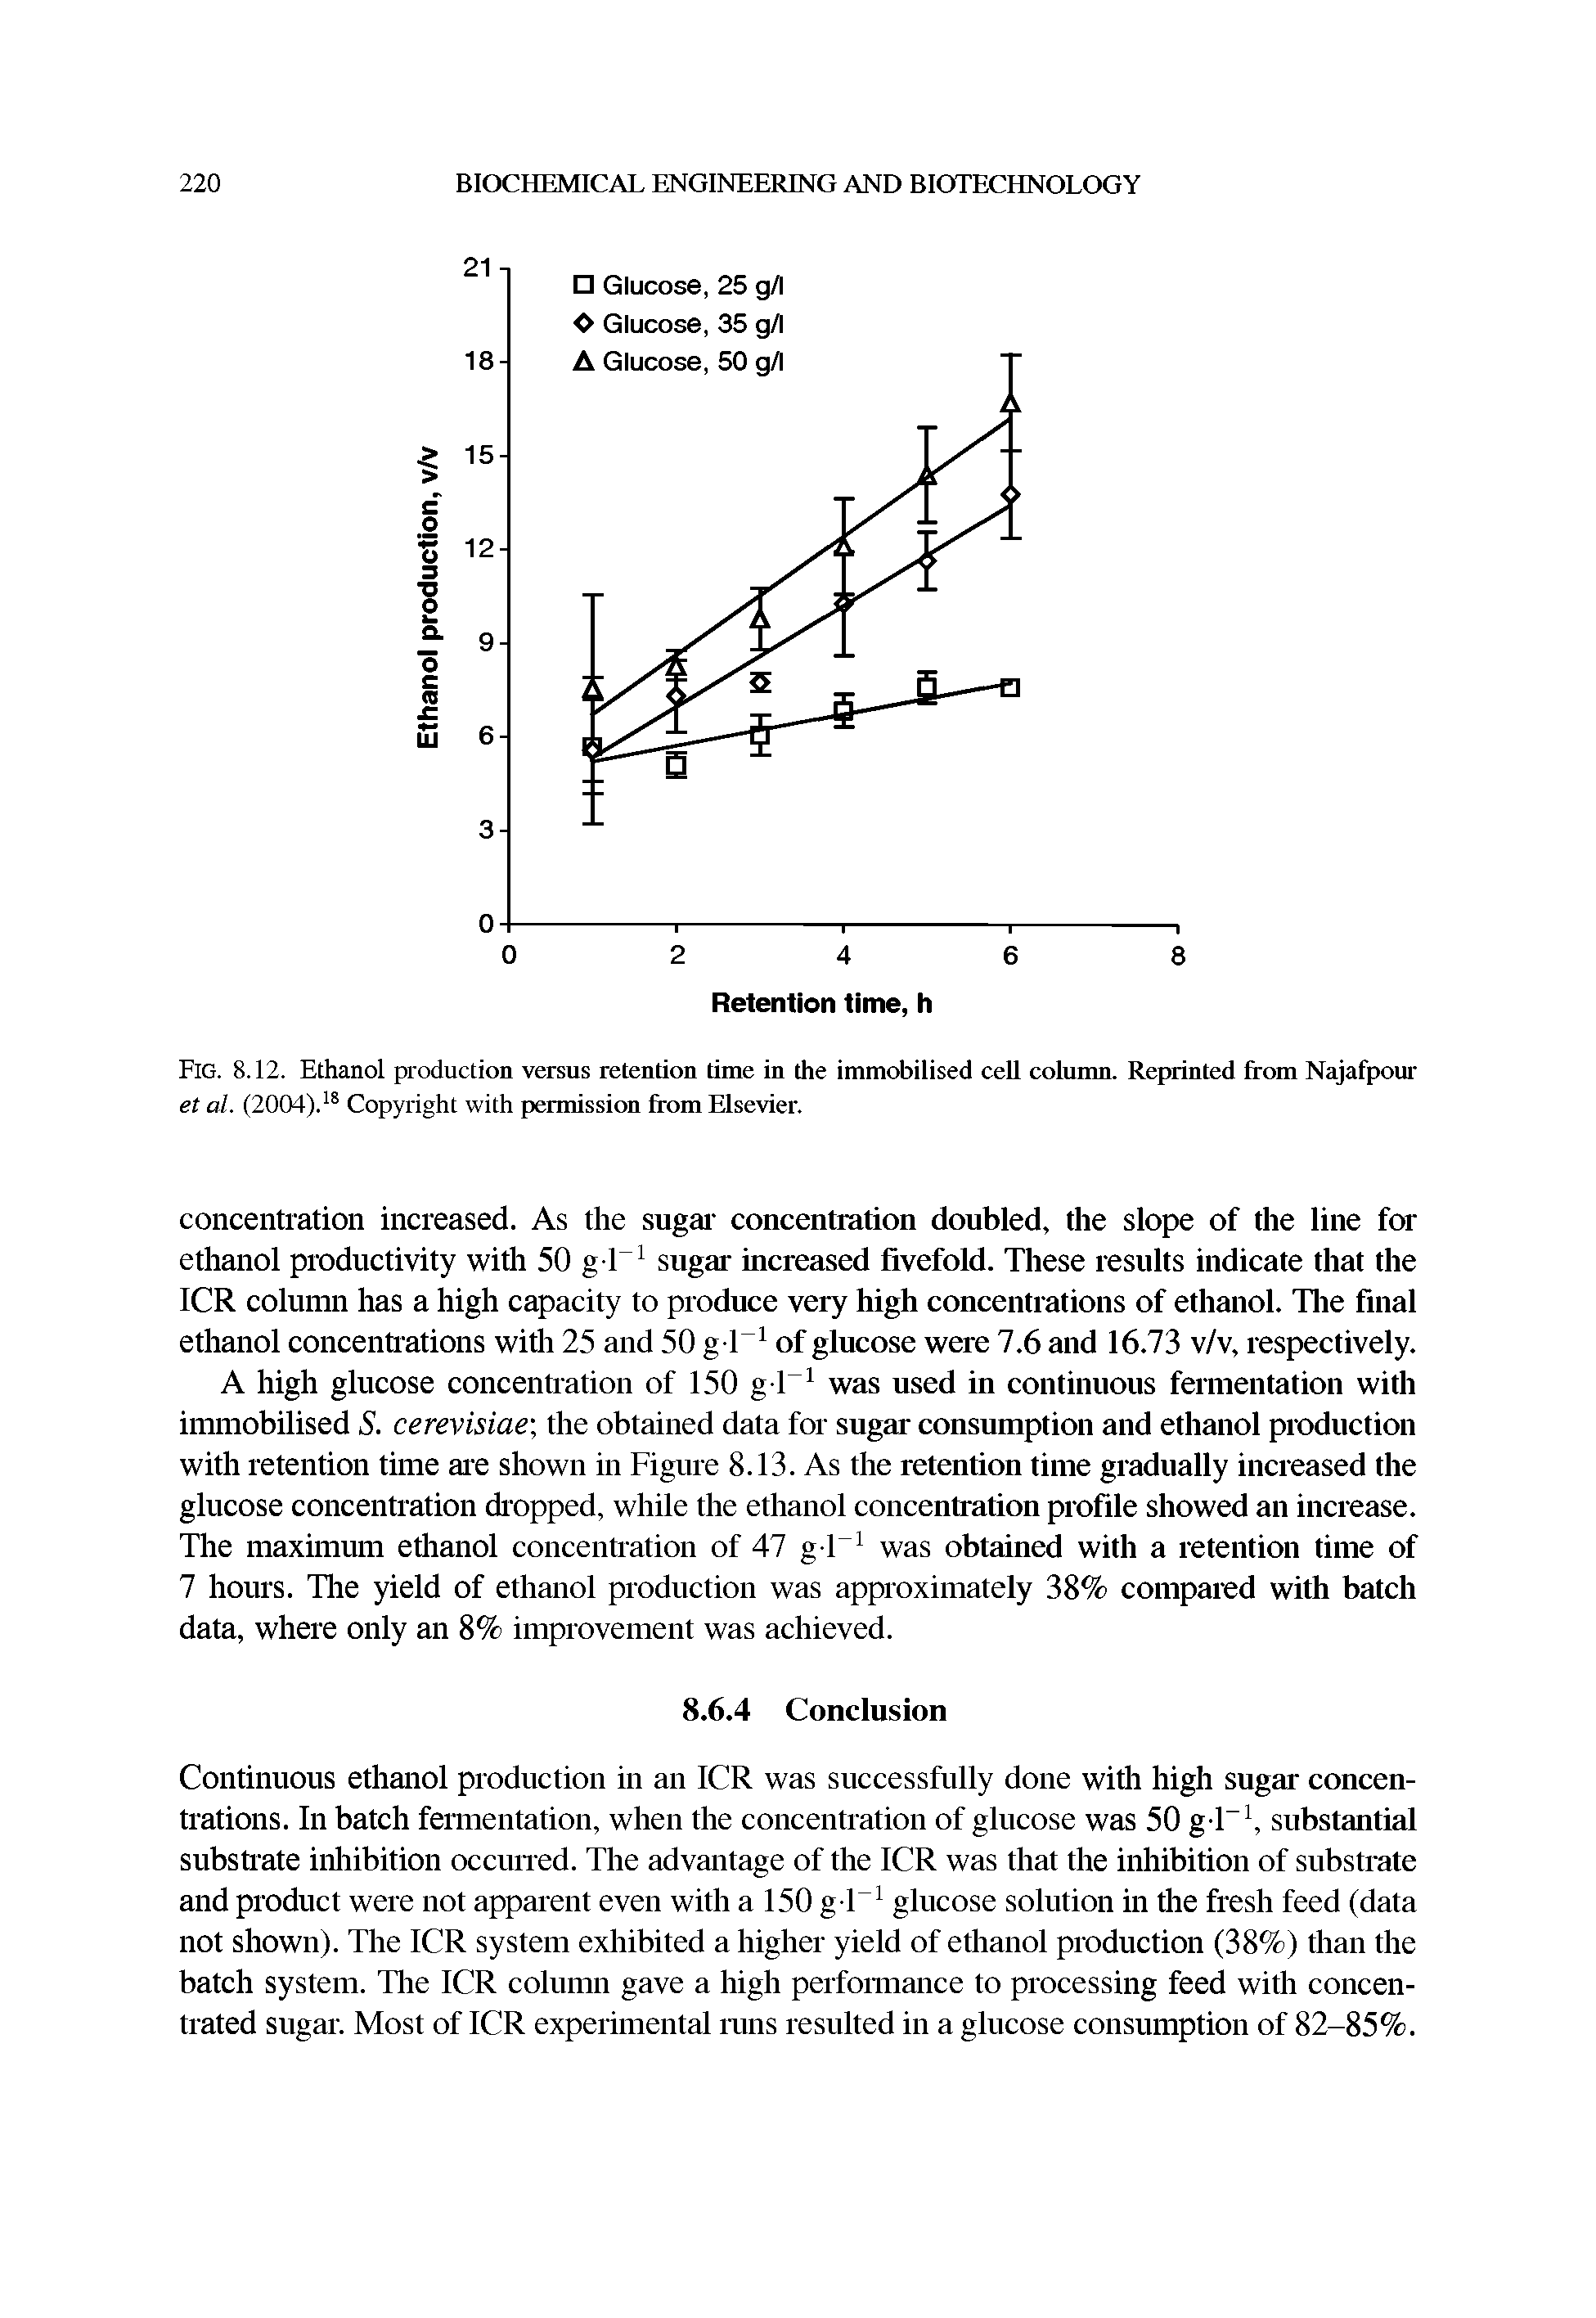 Fig. 8.12. Ethanol production versus retention time in the immobilised cell column. Reprinted from Najafpour et al. (2004).18 Copyright with permission from Elsevier.